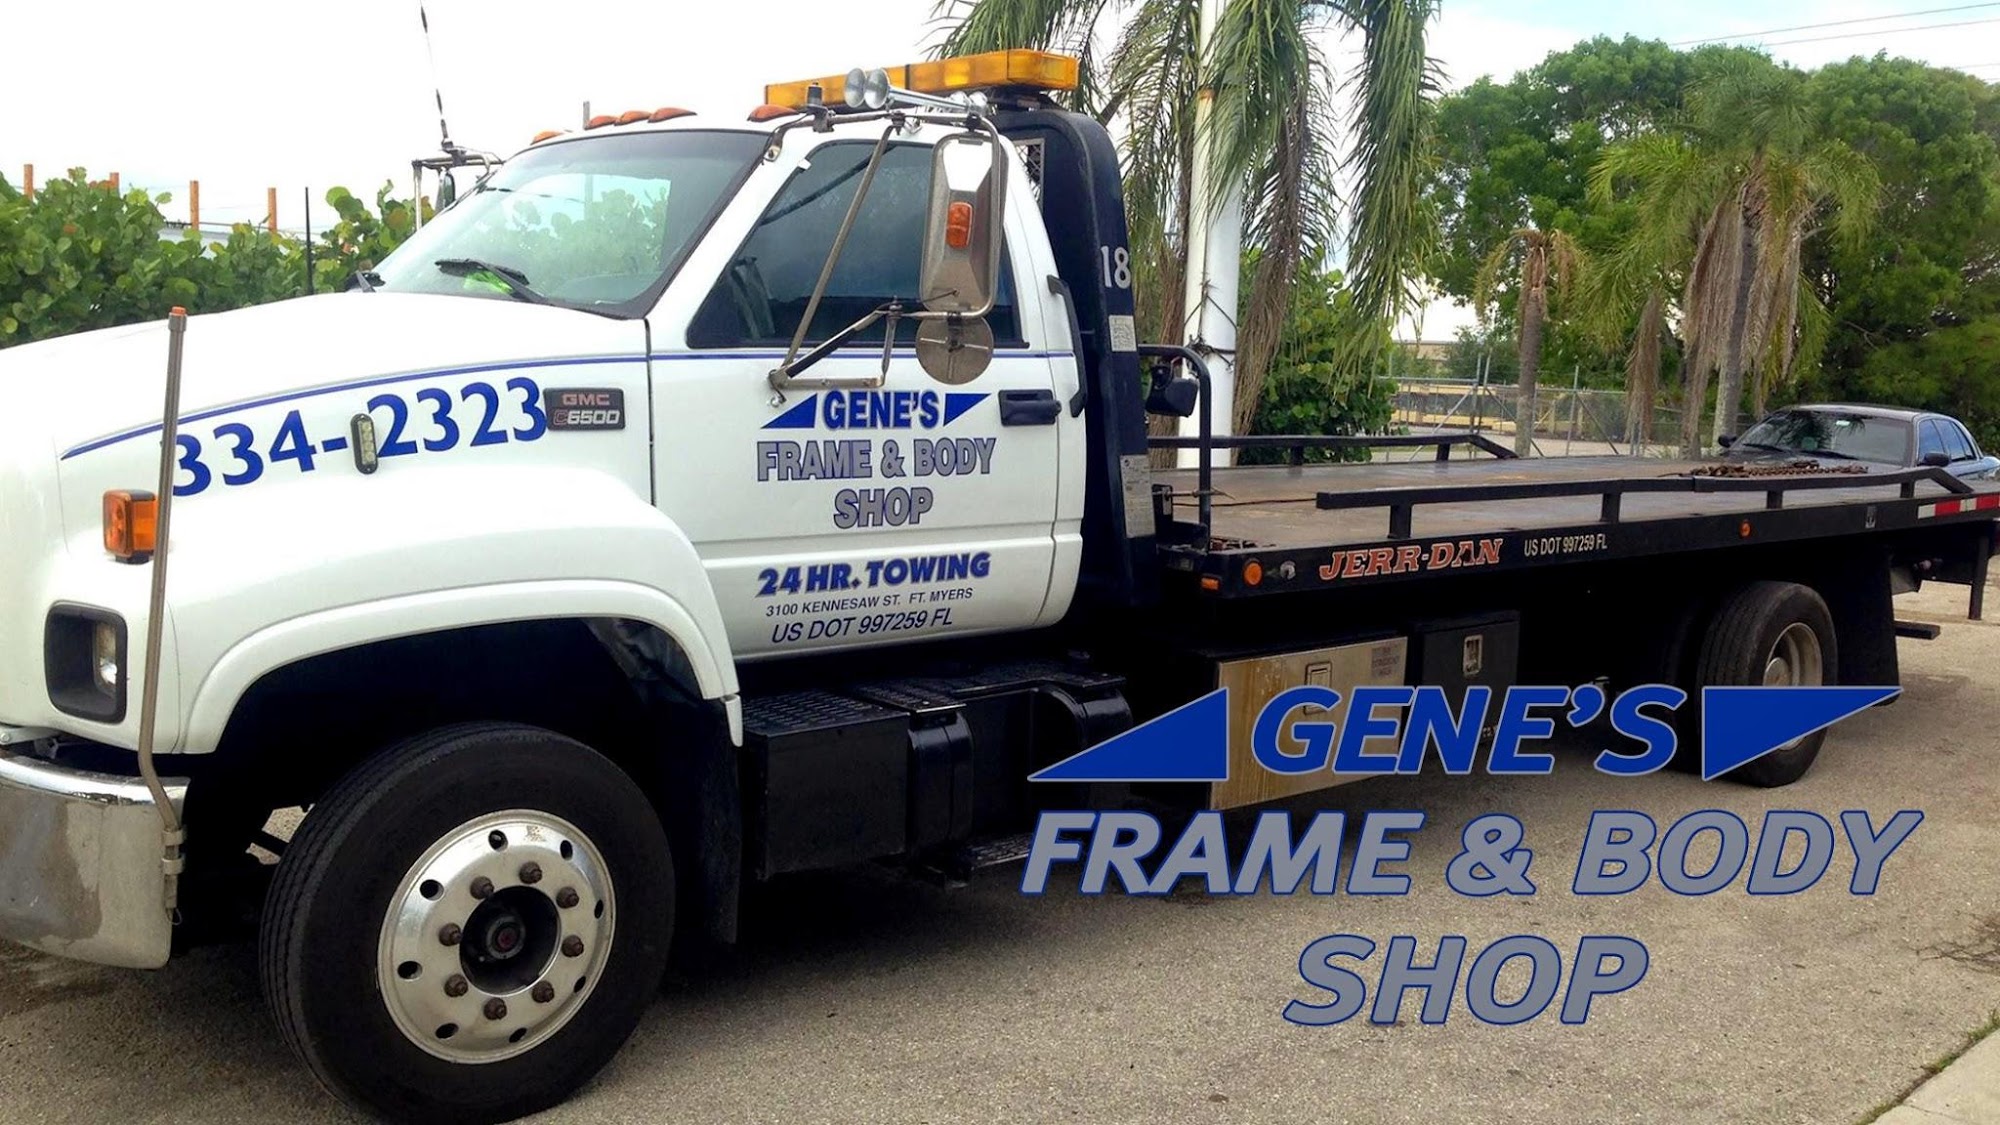 Gene's Auto Frame & Towing